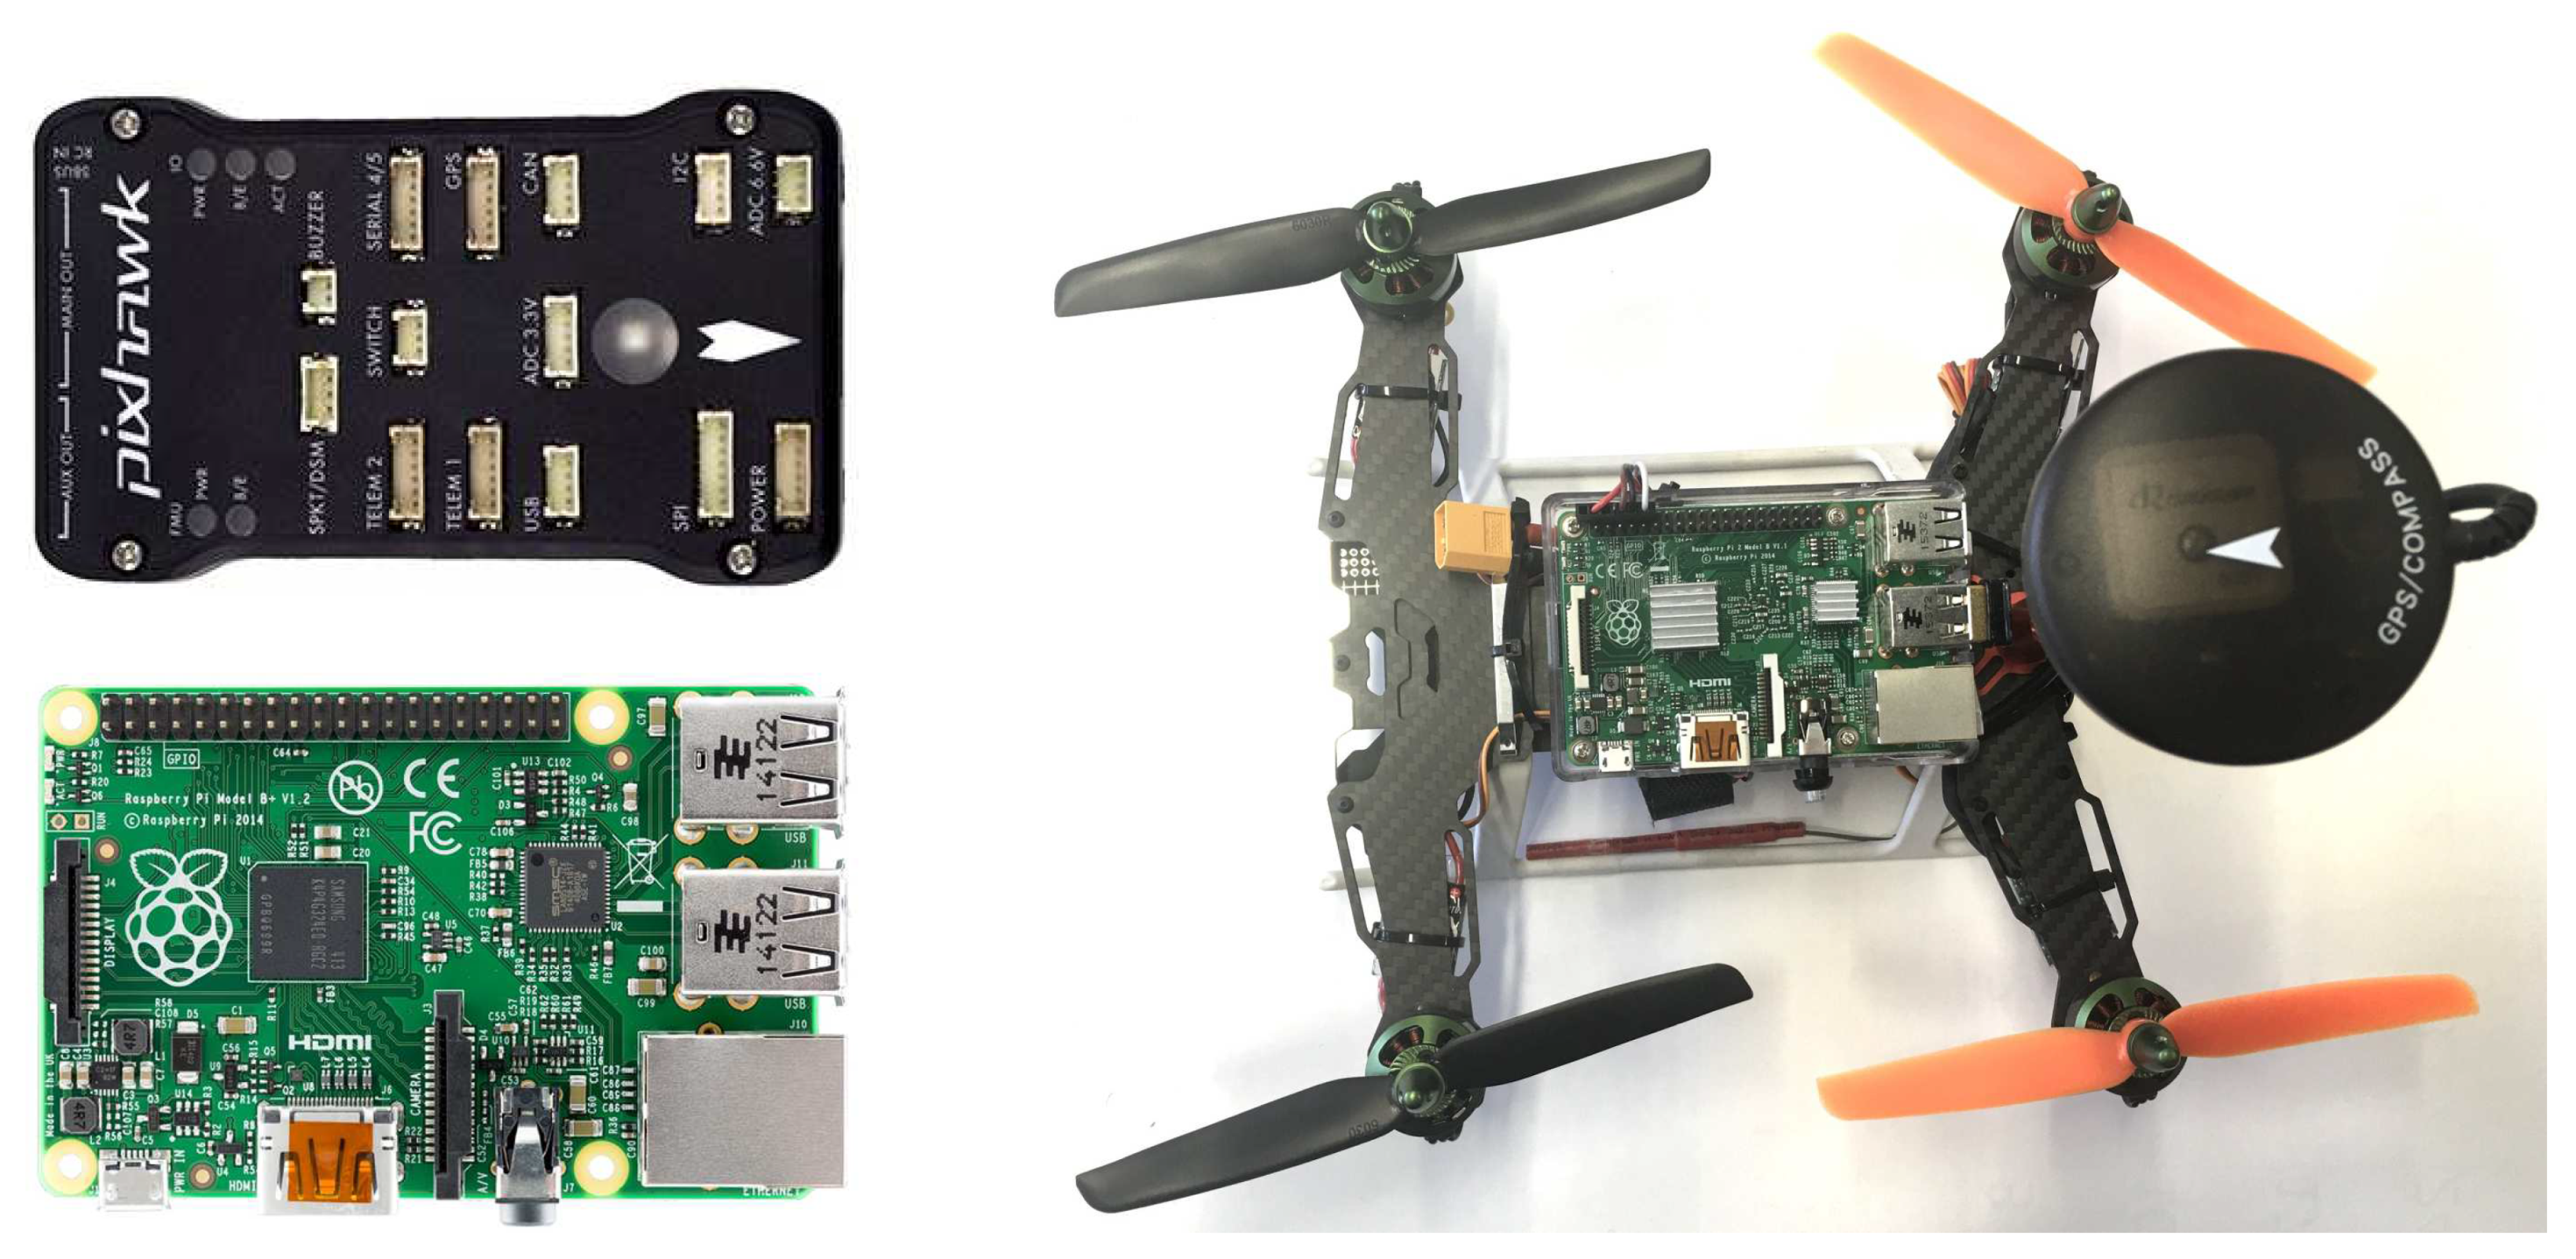 Drones | Free Full-Text | Review: Using Unmanned Aerial Vehicles (UAVs) as  Mobile Sensing Platforms (MSPs) for Disaster Response, Civil Security and  Public Safety | HTML